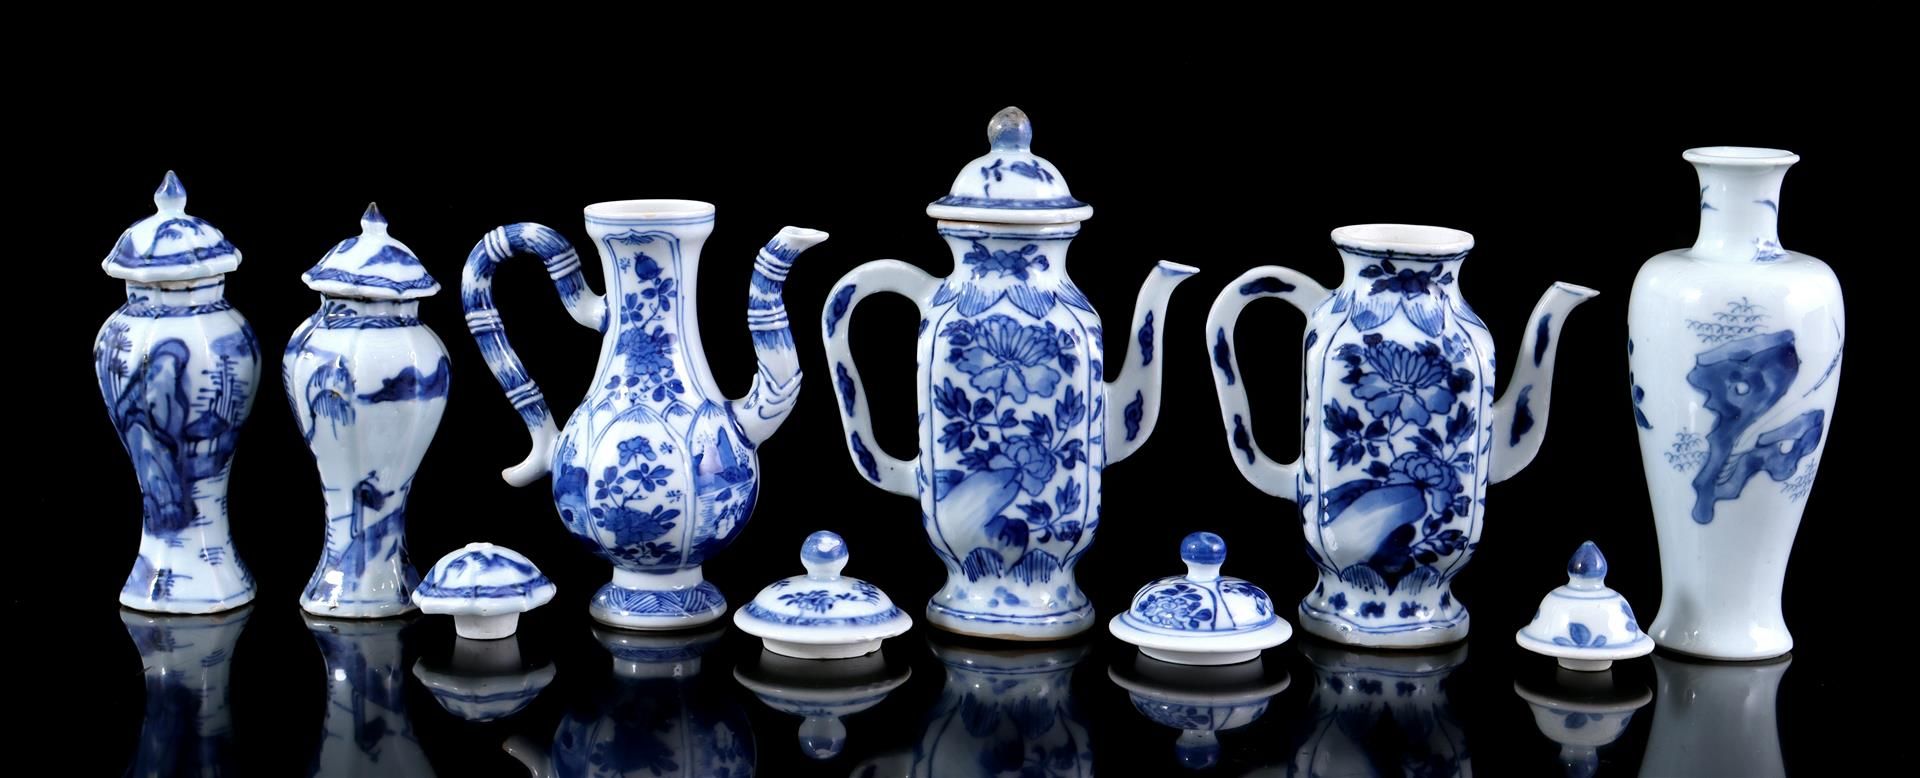 Porcelain miniature jugs, lidded pots and loose lids, China 18th/19th century